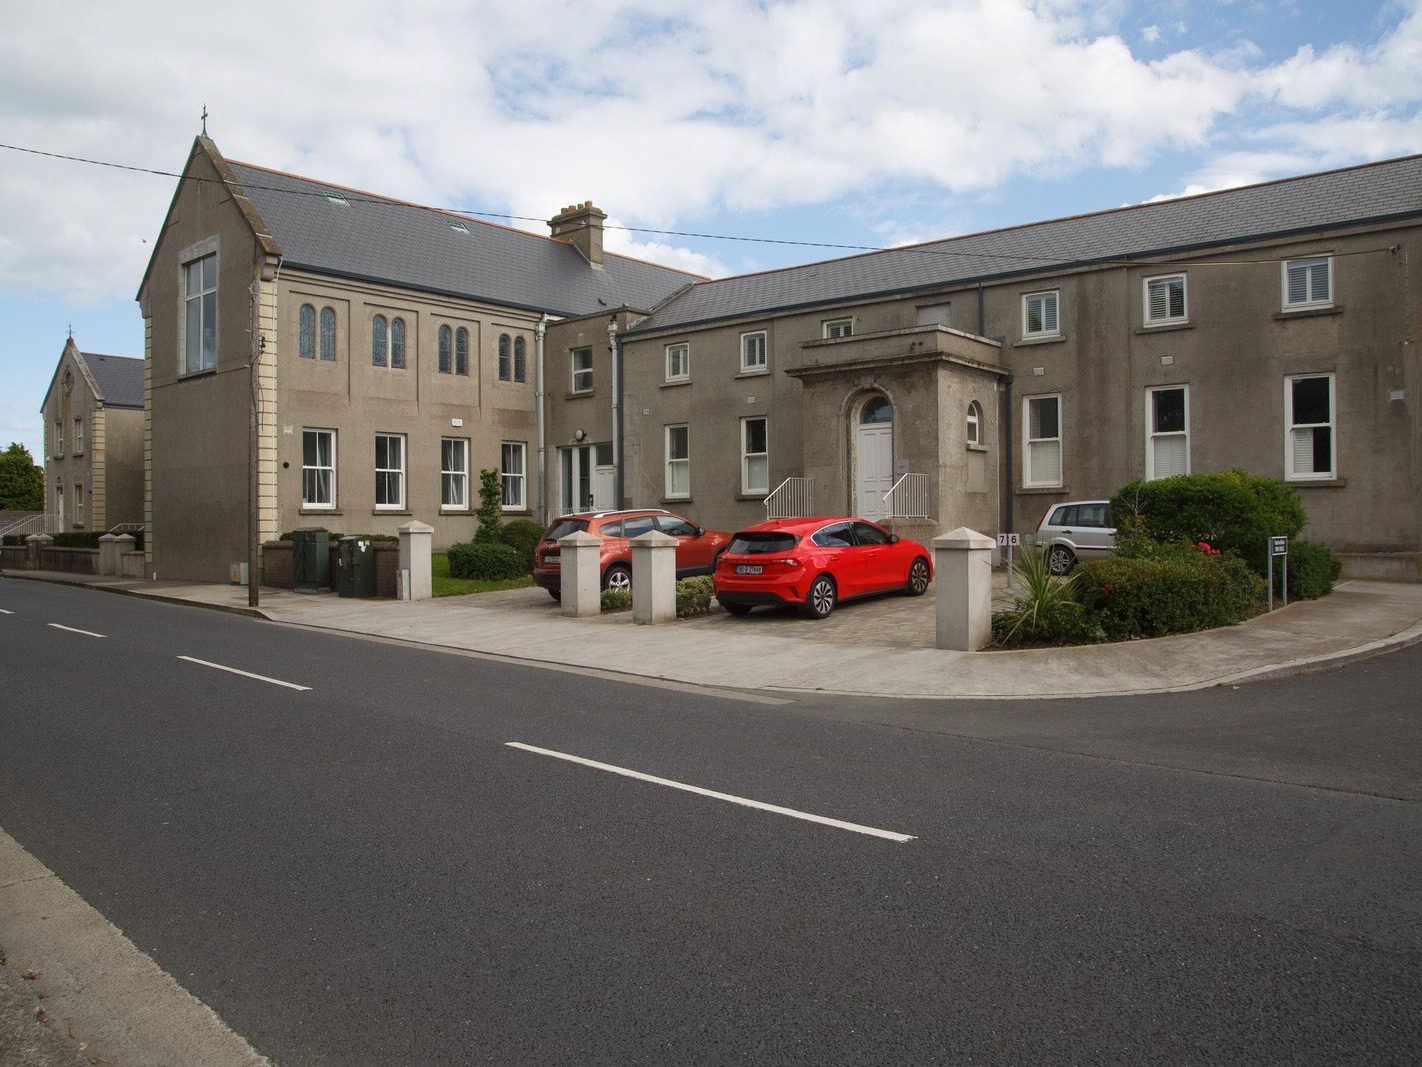 DUBLIN STREET IN BALDOYLE [HOME TO ST MARY'S SCHOOL AND ST PATRICK'S CARE CENTRE] 007